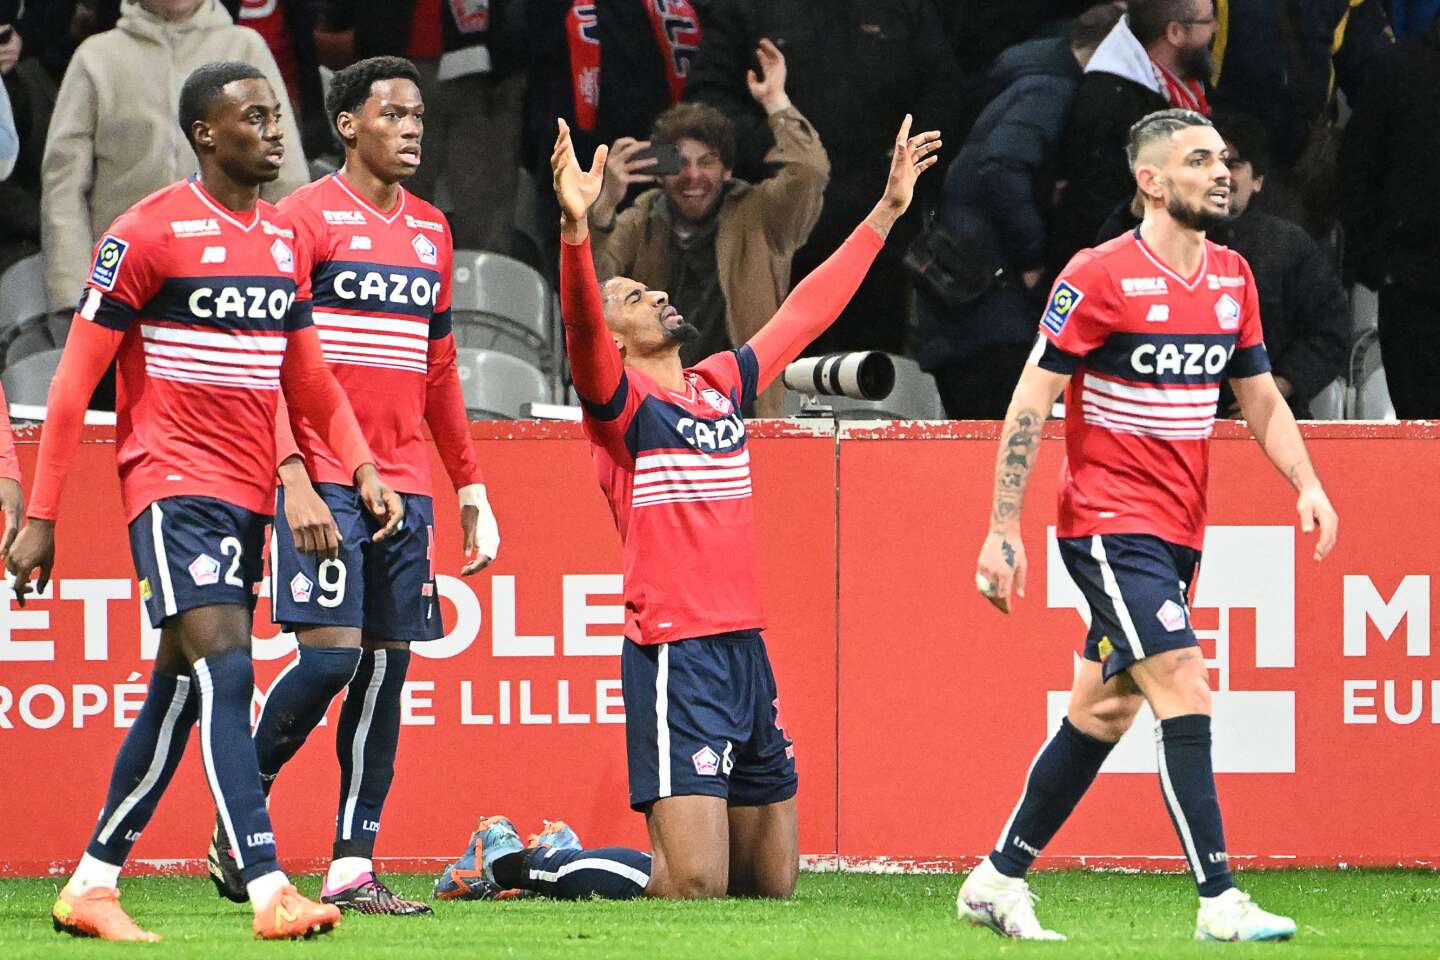 Lille beats Brest in pain and temporarily regains 5th place - Time News